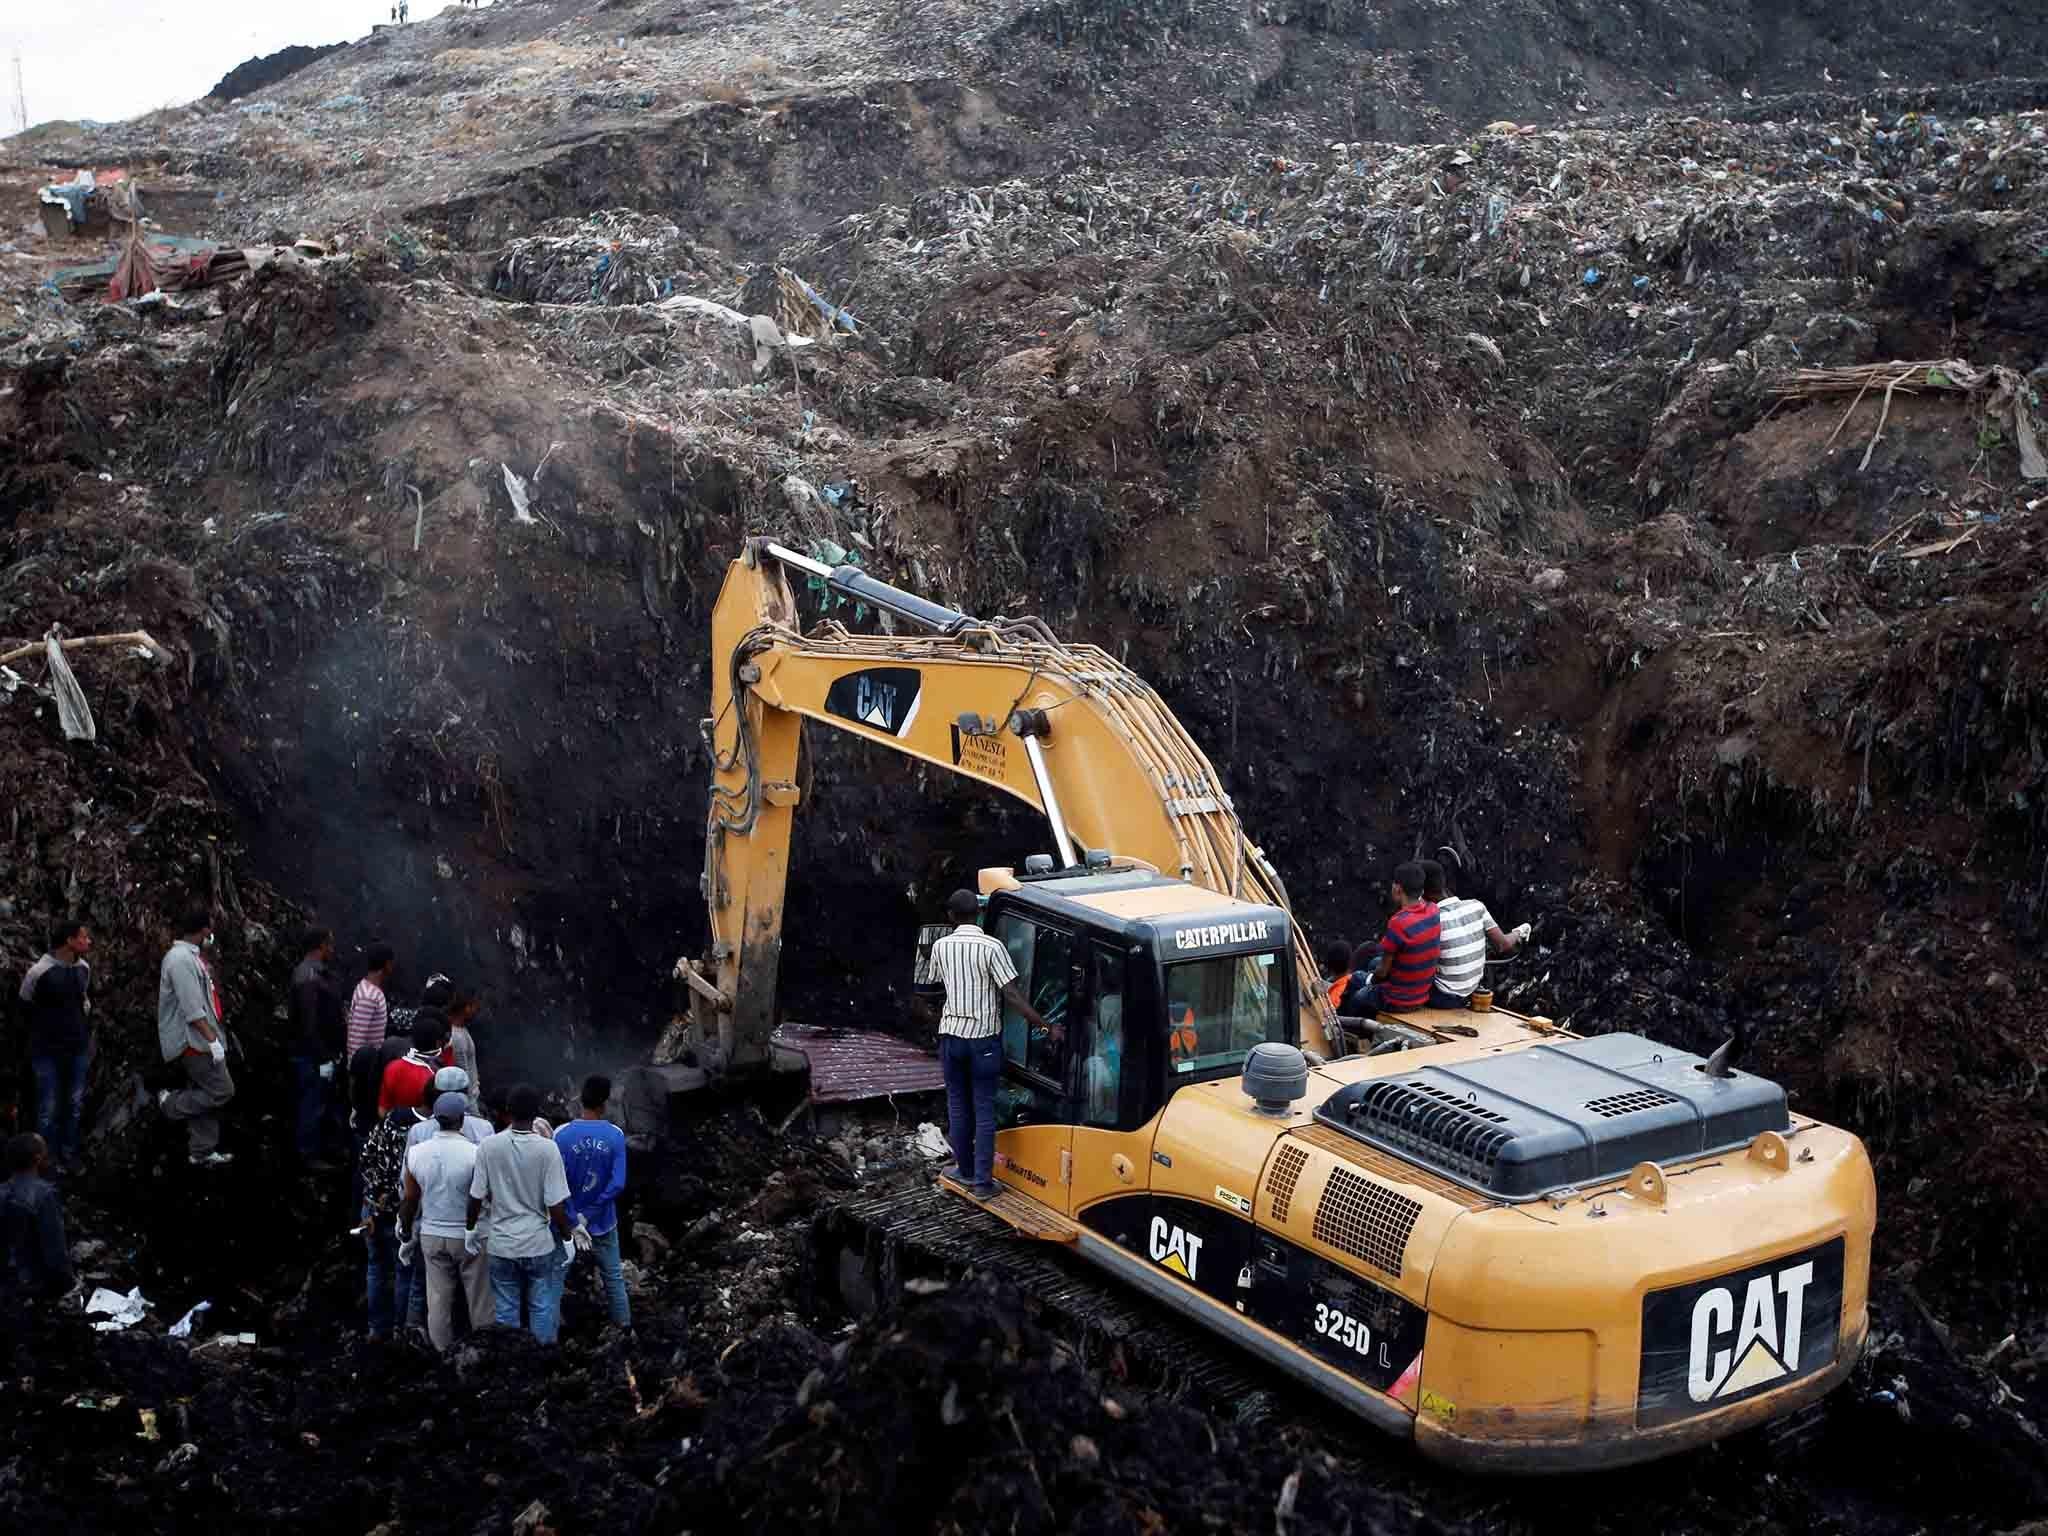 Rescue workers watch as excavators dig into a pile of garbage in search of missing people following a landslide when a mound of trash collapsed on an informal settlement at the Koshe garbage dump in Ethiopia's capital Addis Ababa